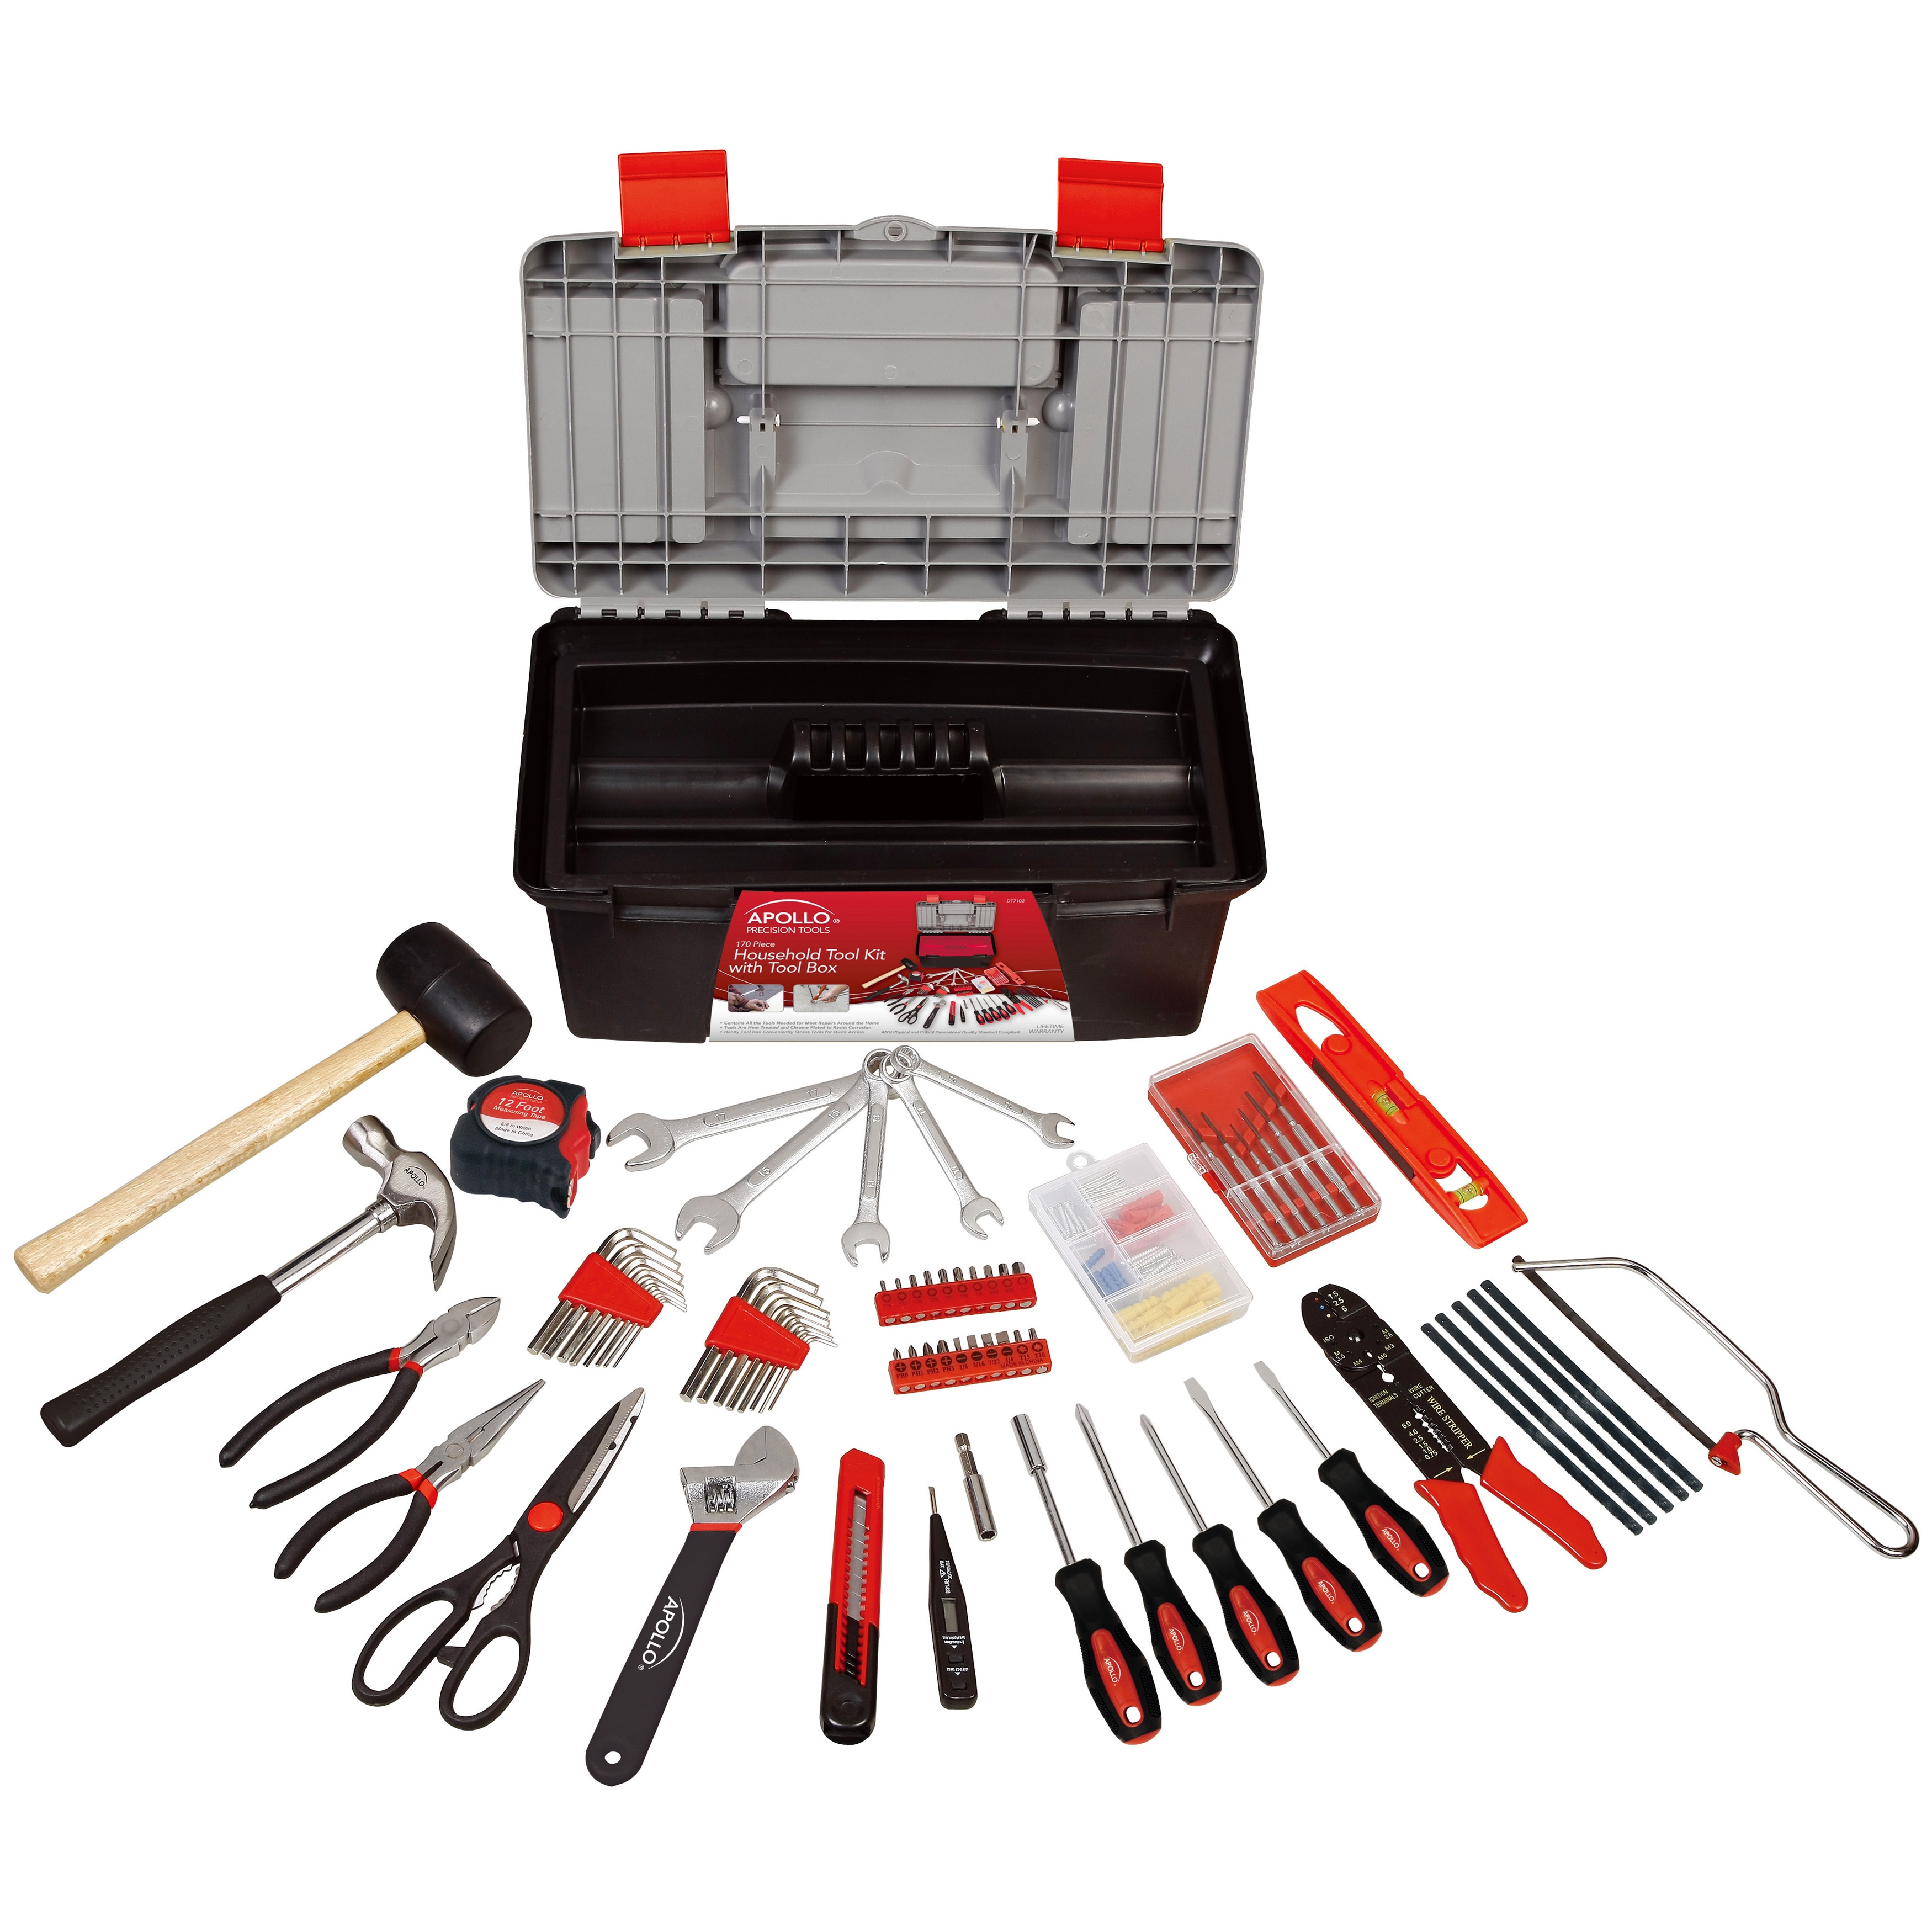 Top Product Reviews for Apollo 170-piece Tool Kit with Tool Box 8202595  Bed Bath  Beyond